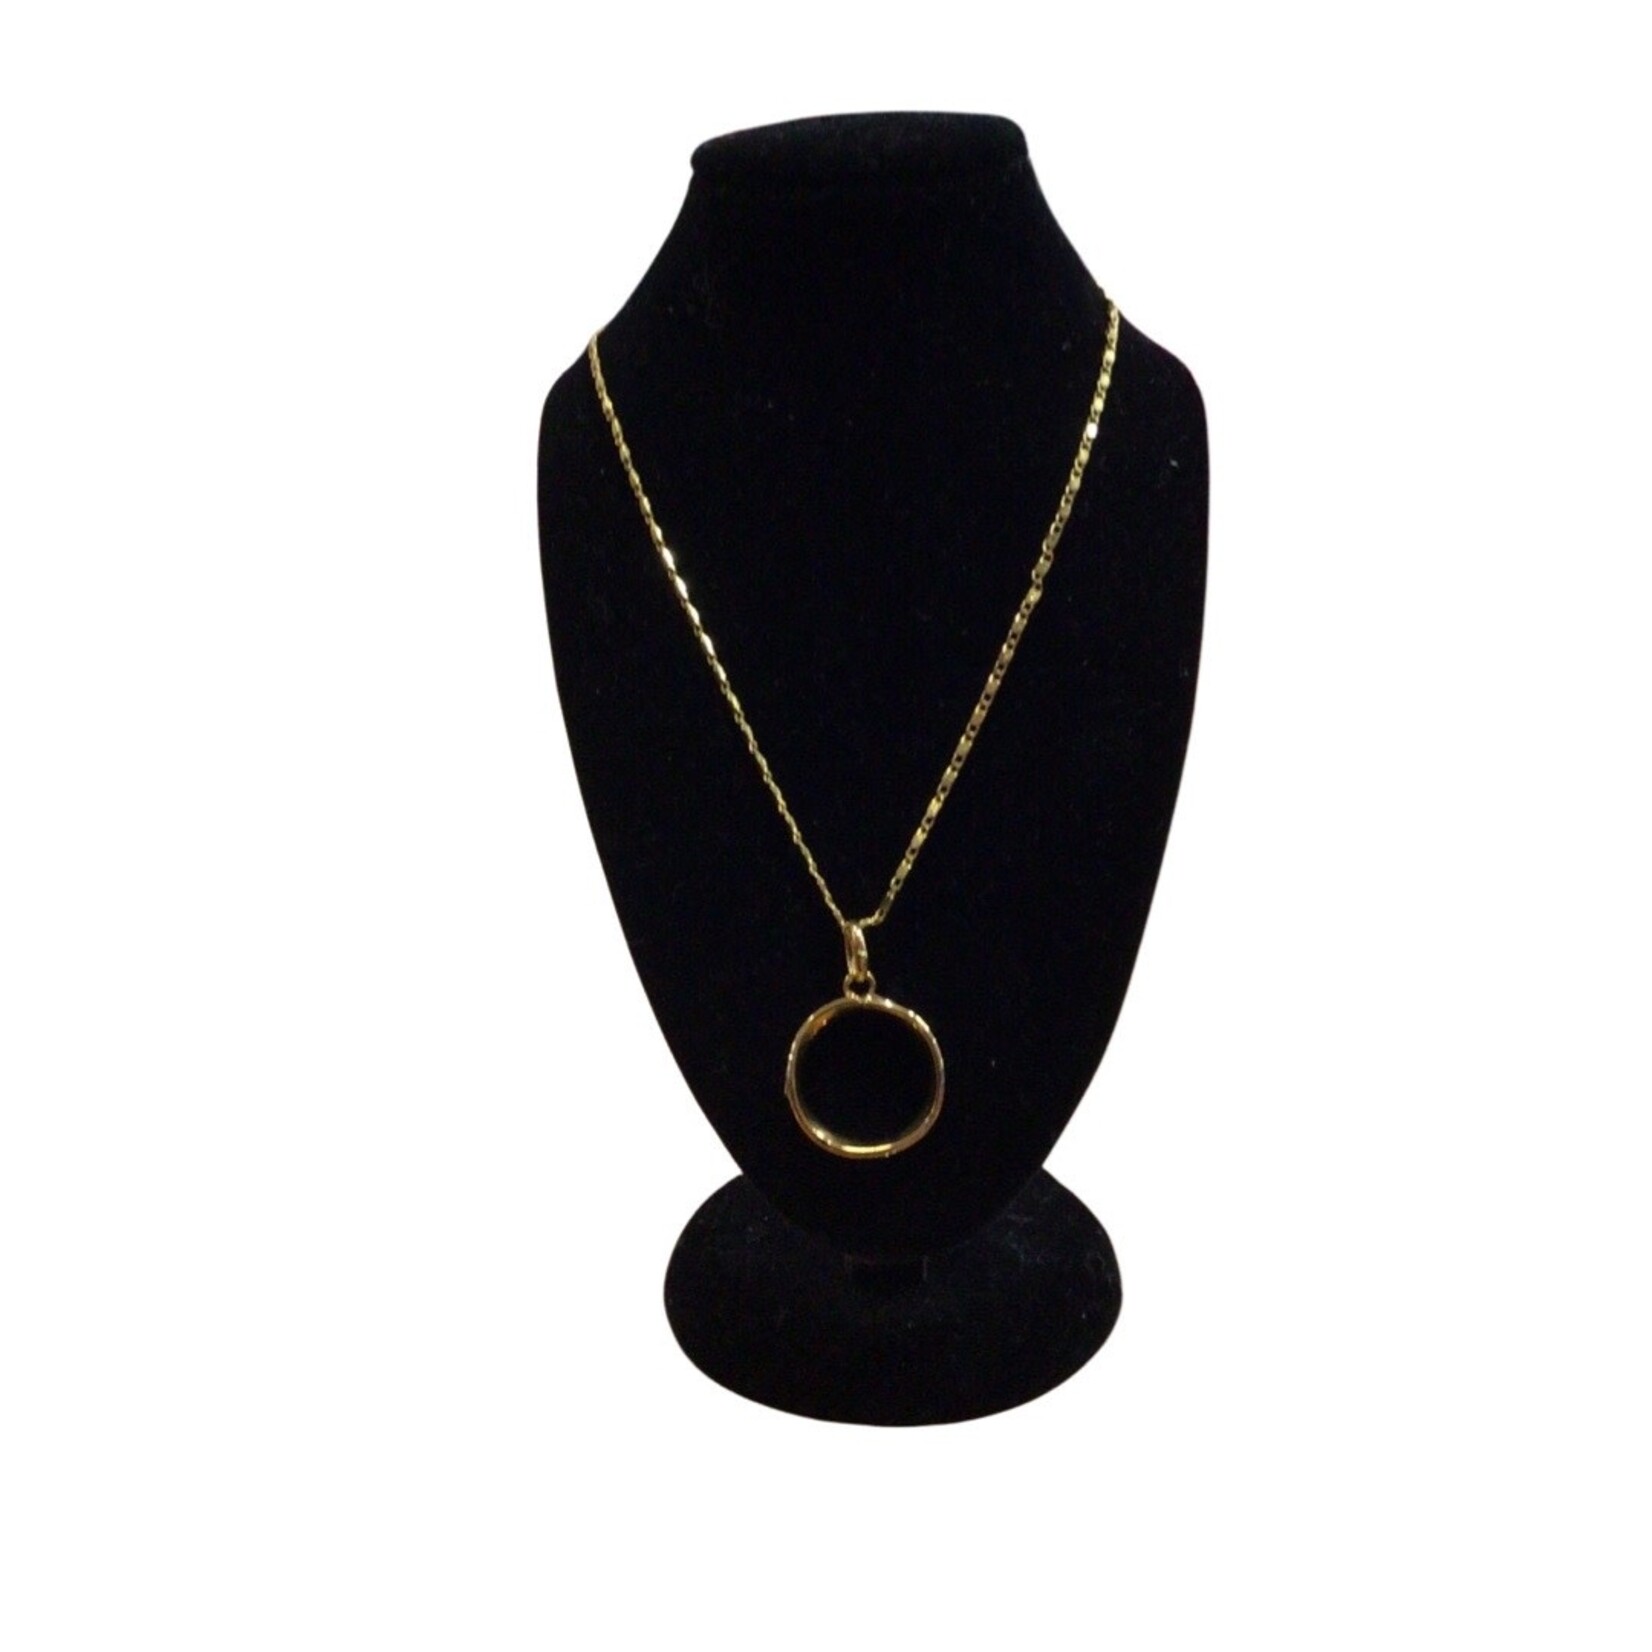 Trend Jewellery Gold Twisted Ring Pendant Necklace